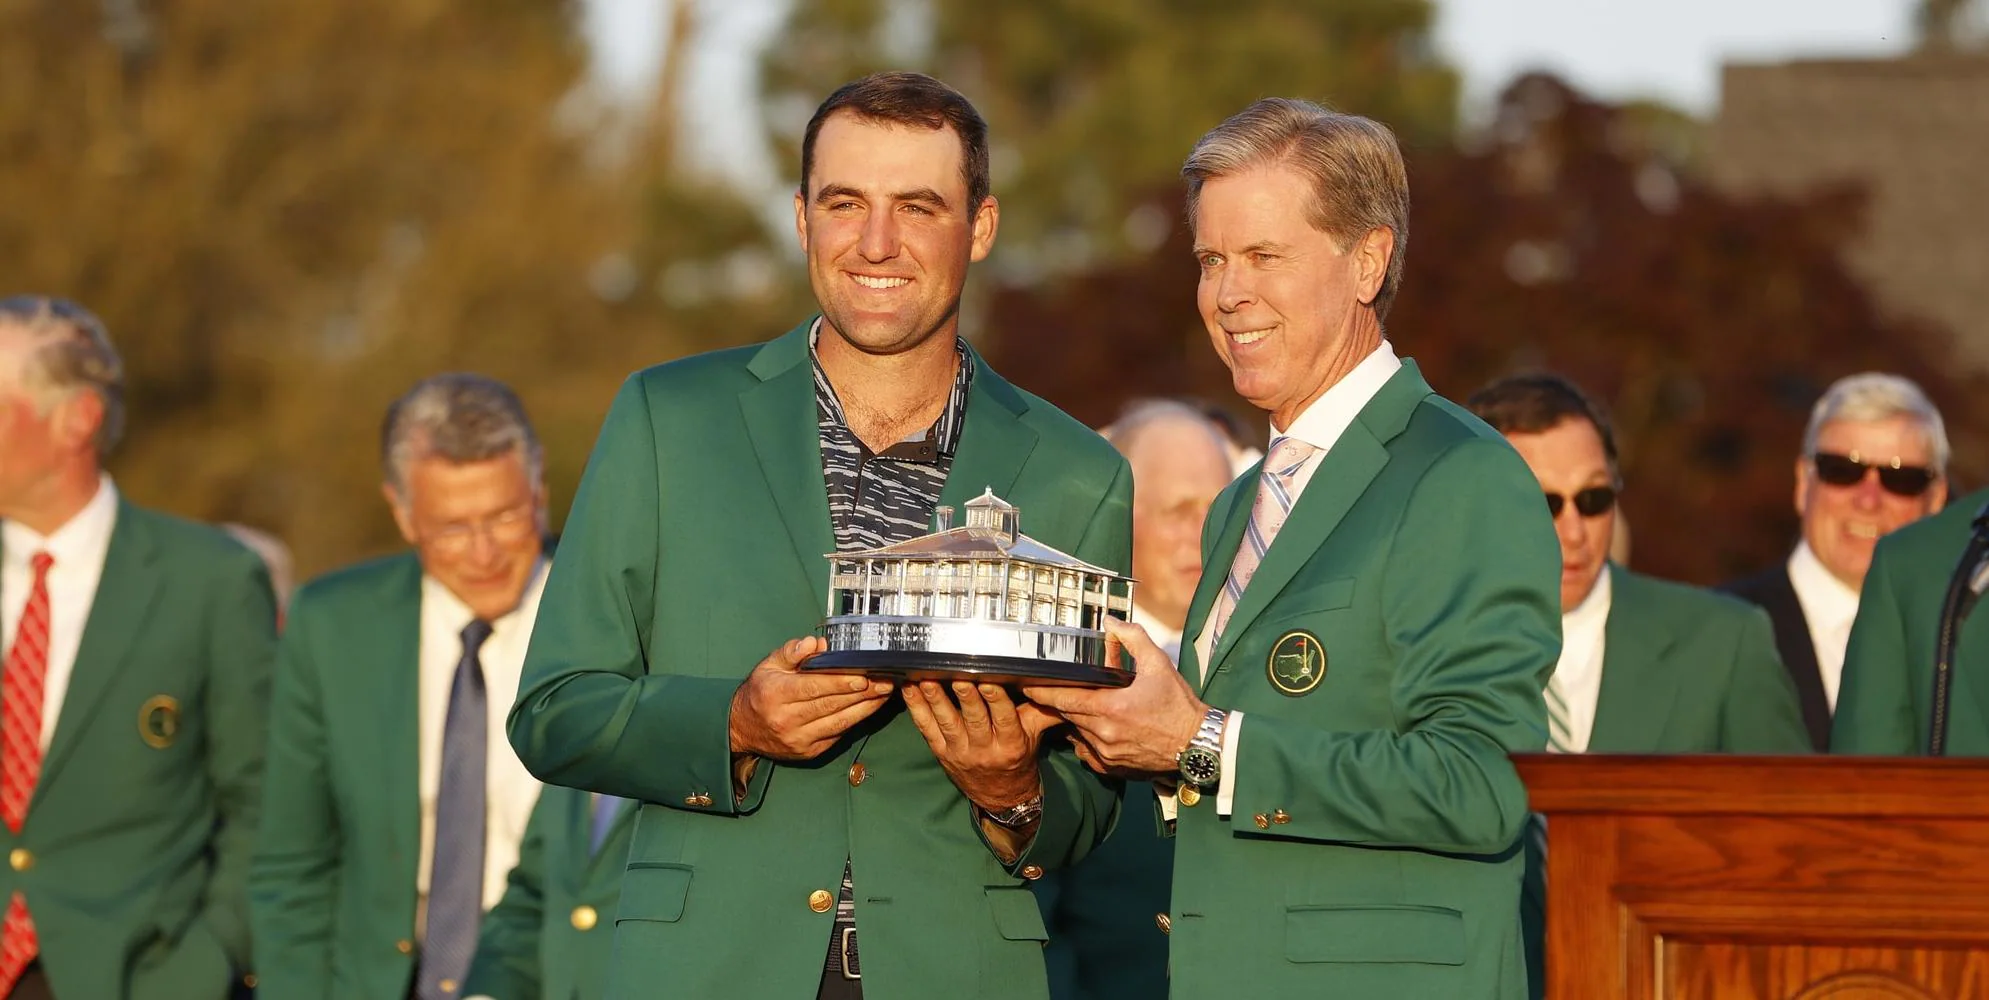 Forbes: "Masters, 142 million in revenue but it could have been more"